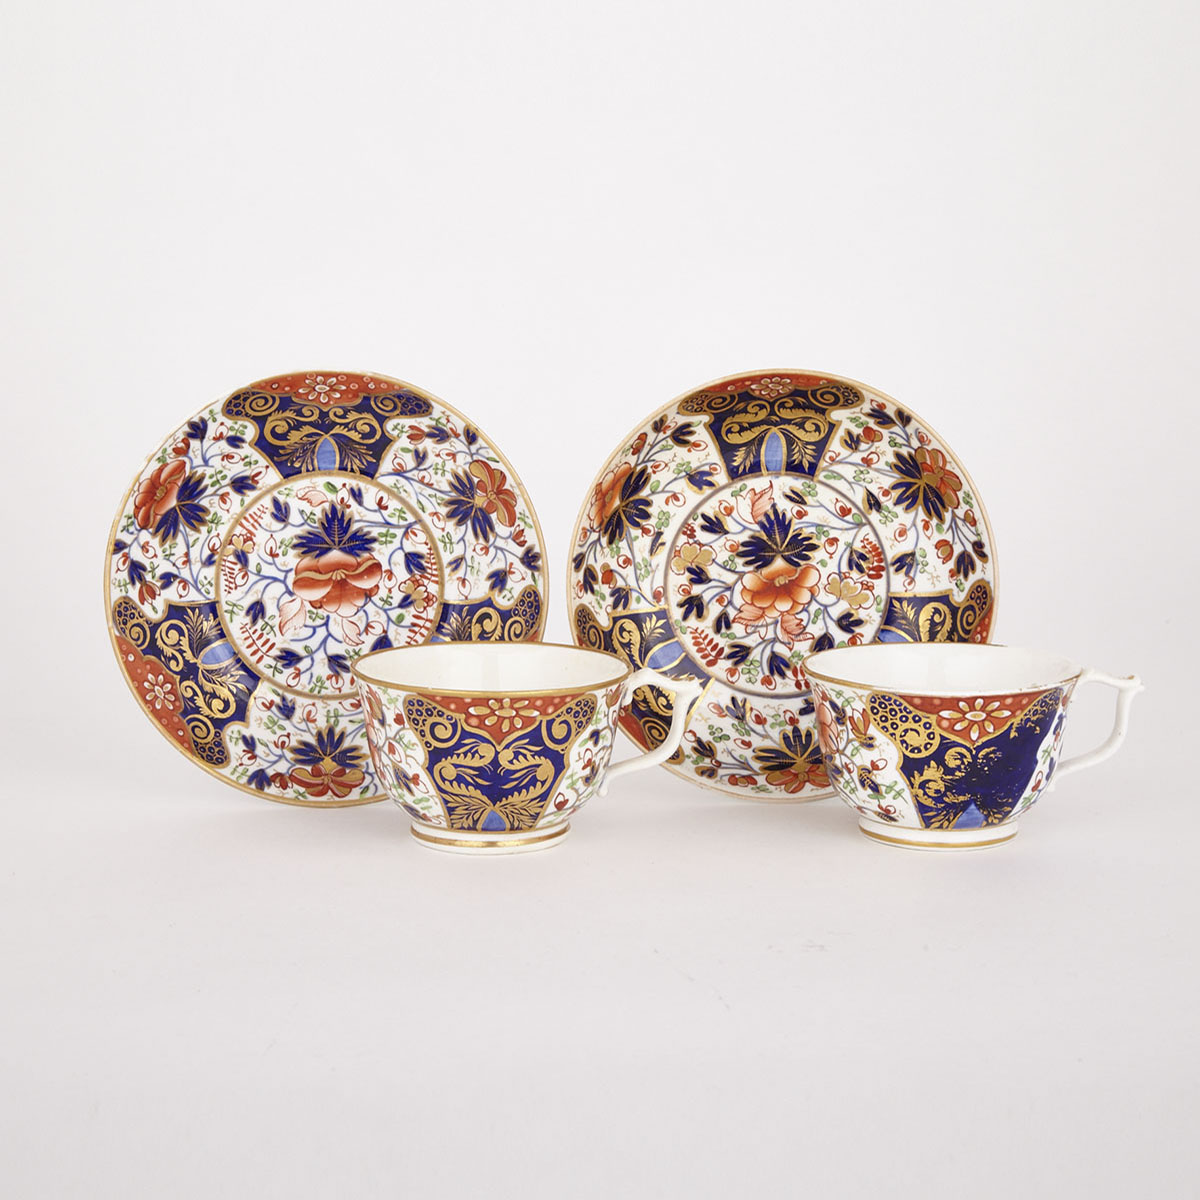 Two Derby Japan Pattern Tea Cups and Saucers, c.1820